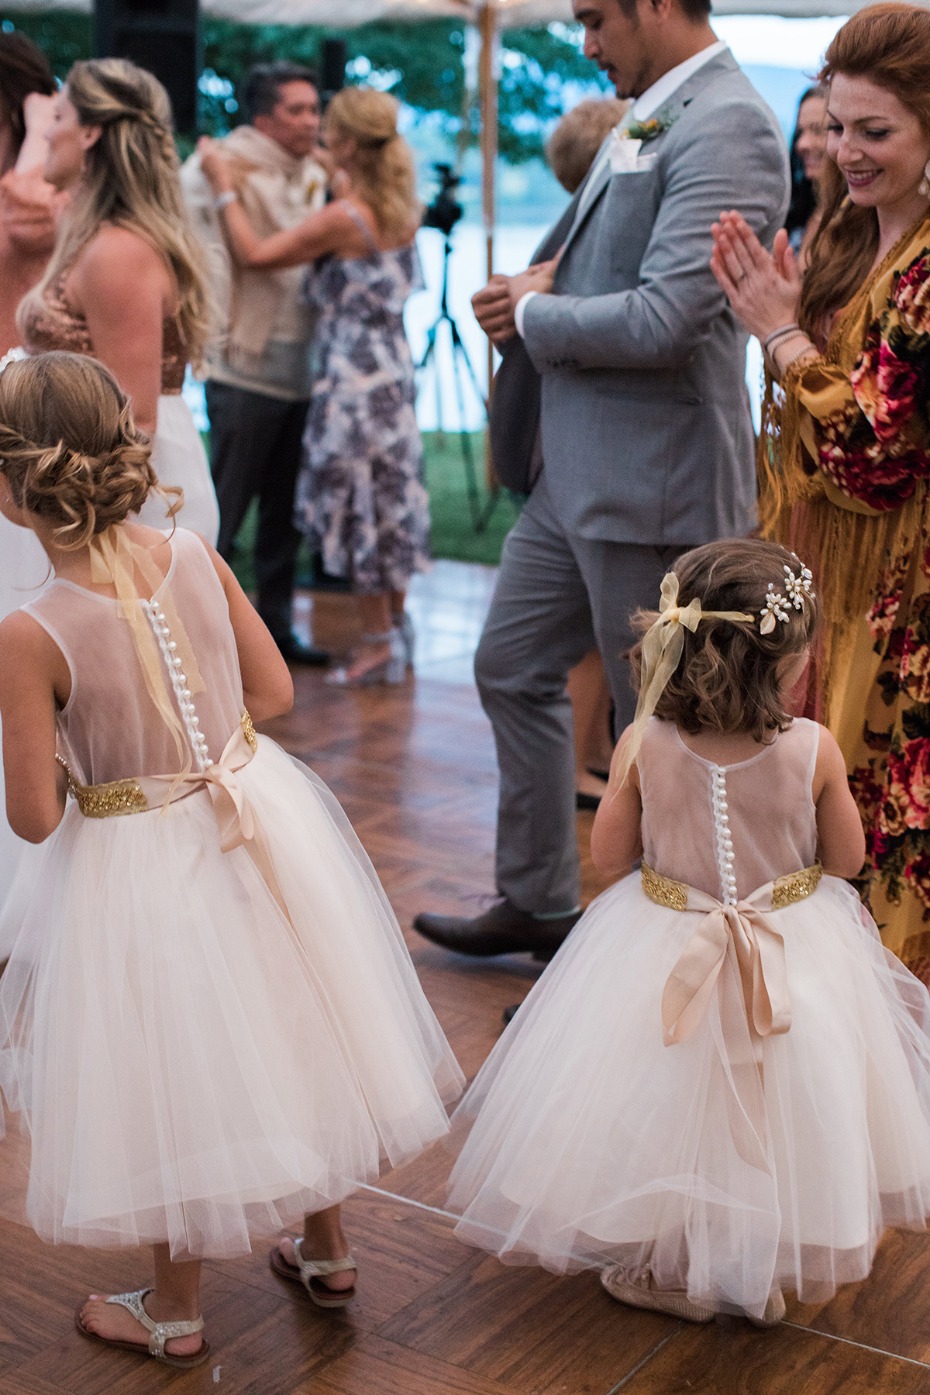 flower girls in tulle skirts and wedding halos